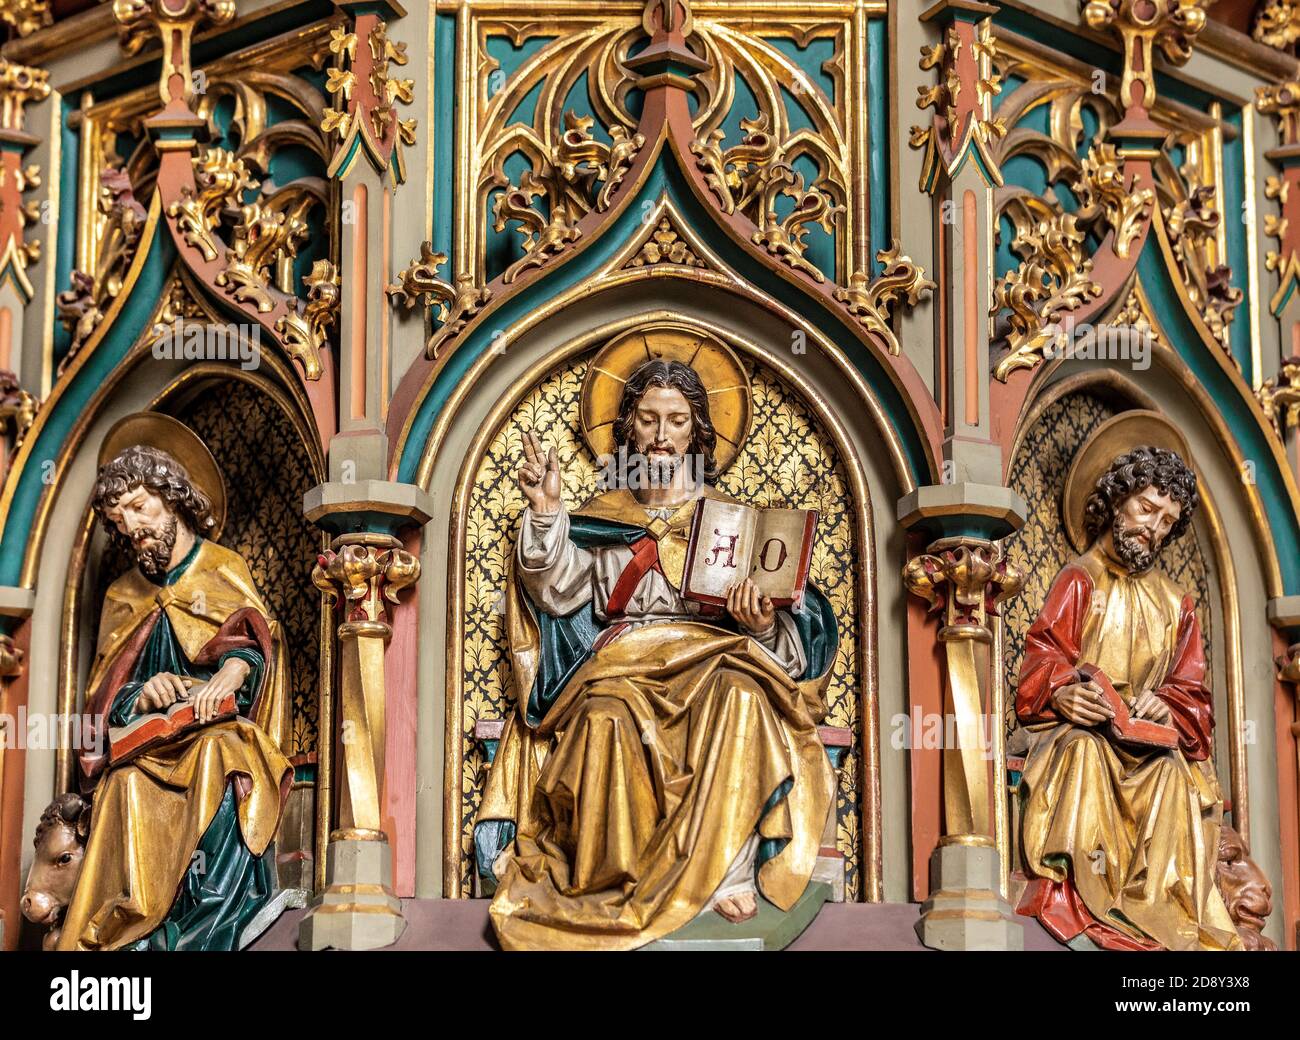 Detail of church artwork in Chiusa. a village in the Alto Adige region of northern Italy. The village is also known by its German name, Klausen. Stock Photo